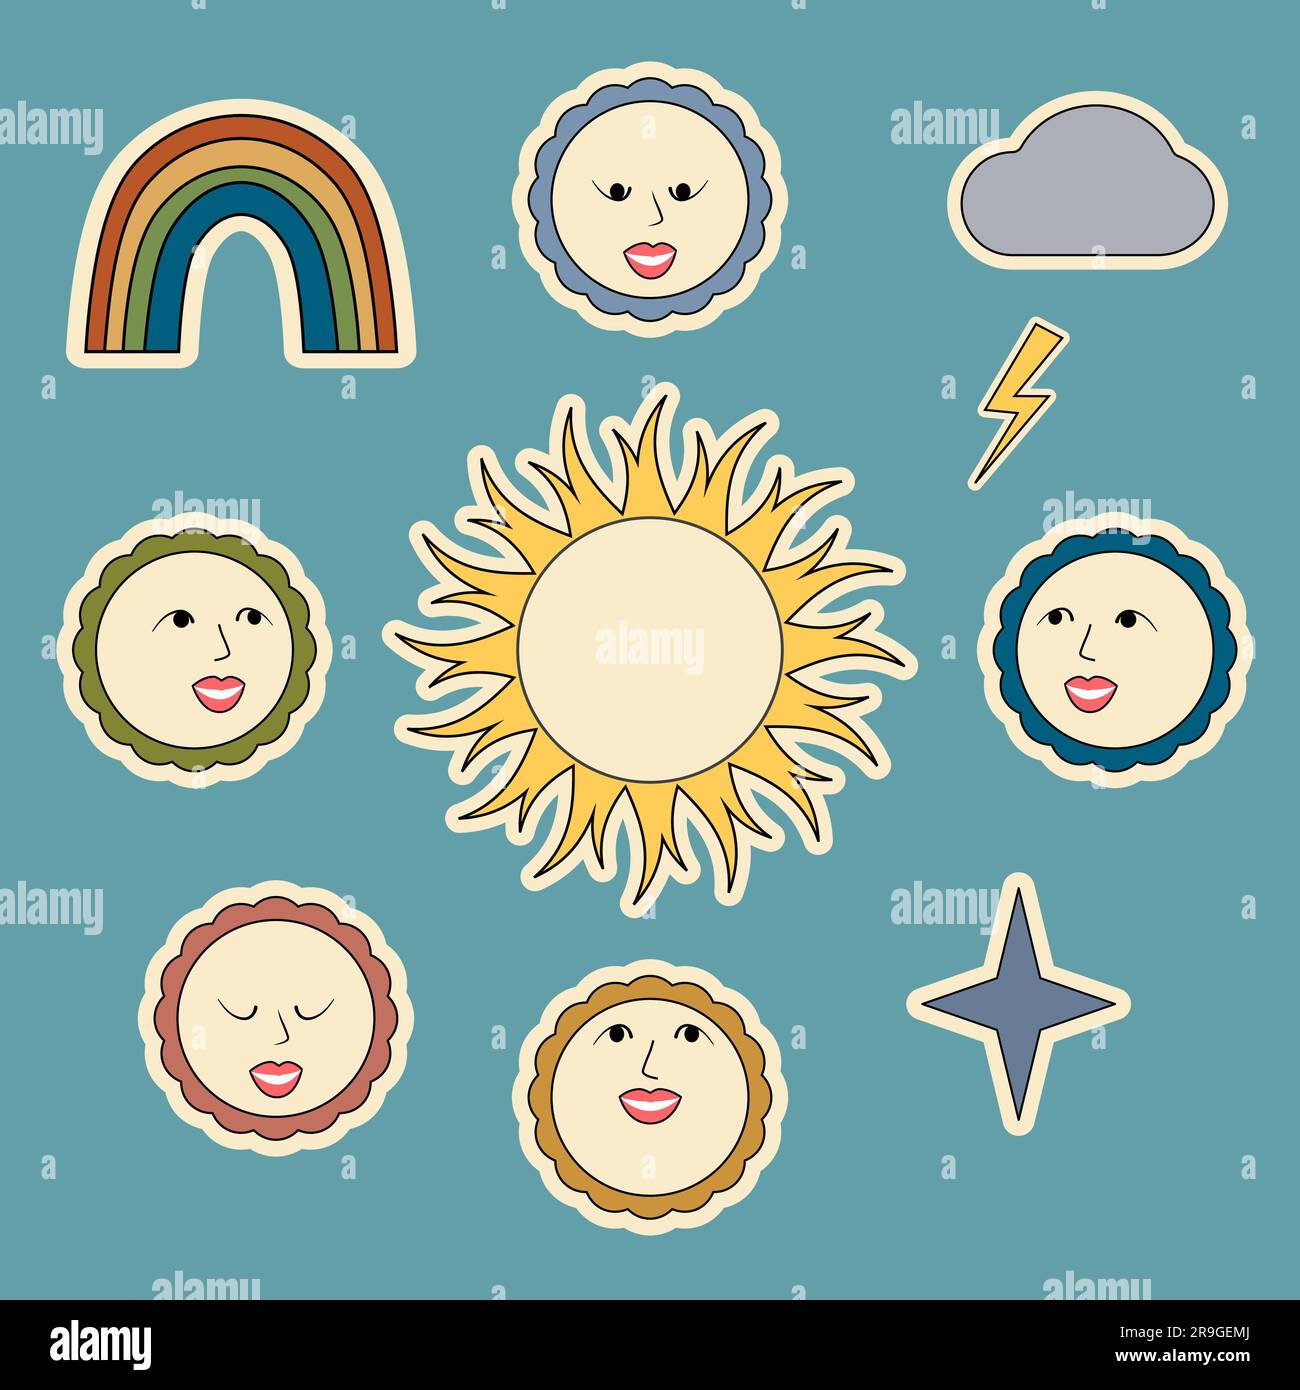 Sticker Illustration of a rainbow with fun clouds 